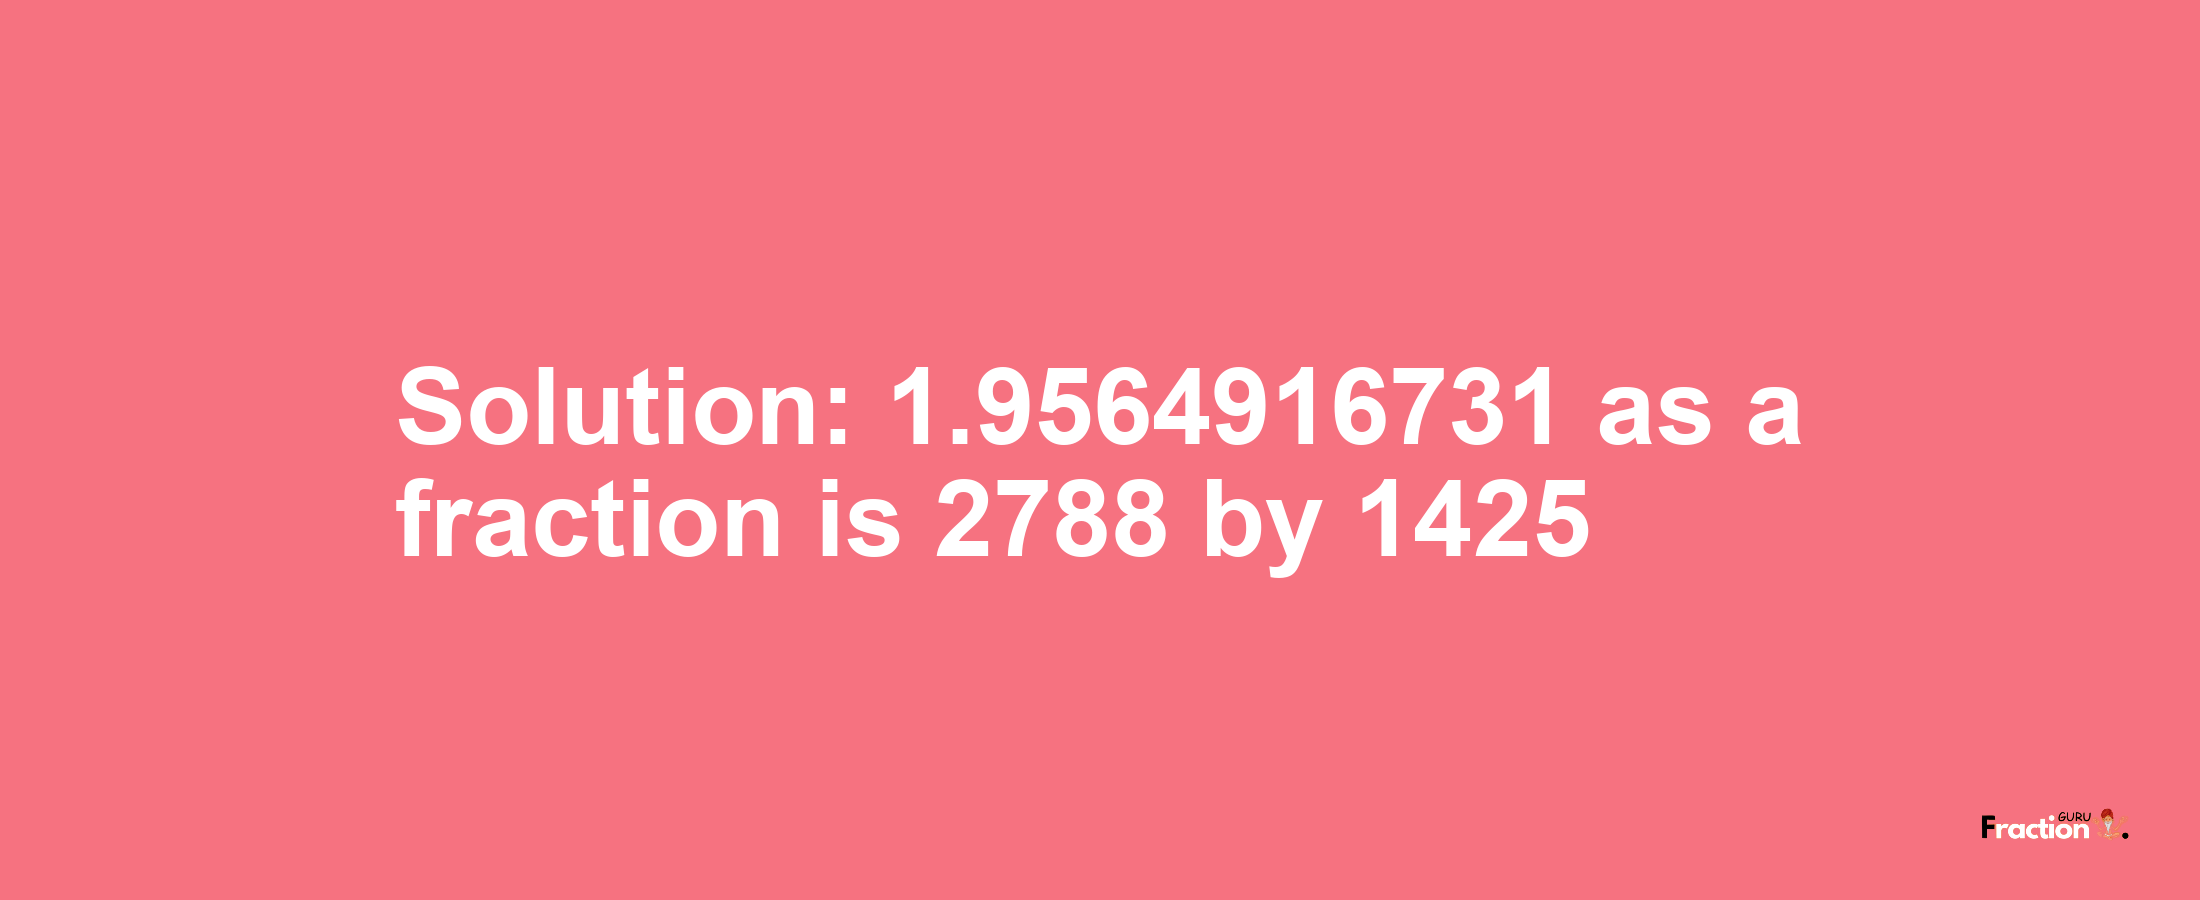 Solution:1.9564916731 as a fraction is 2788/1425